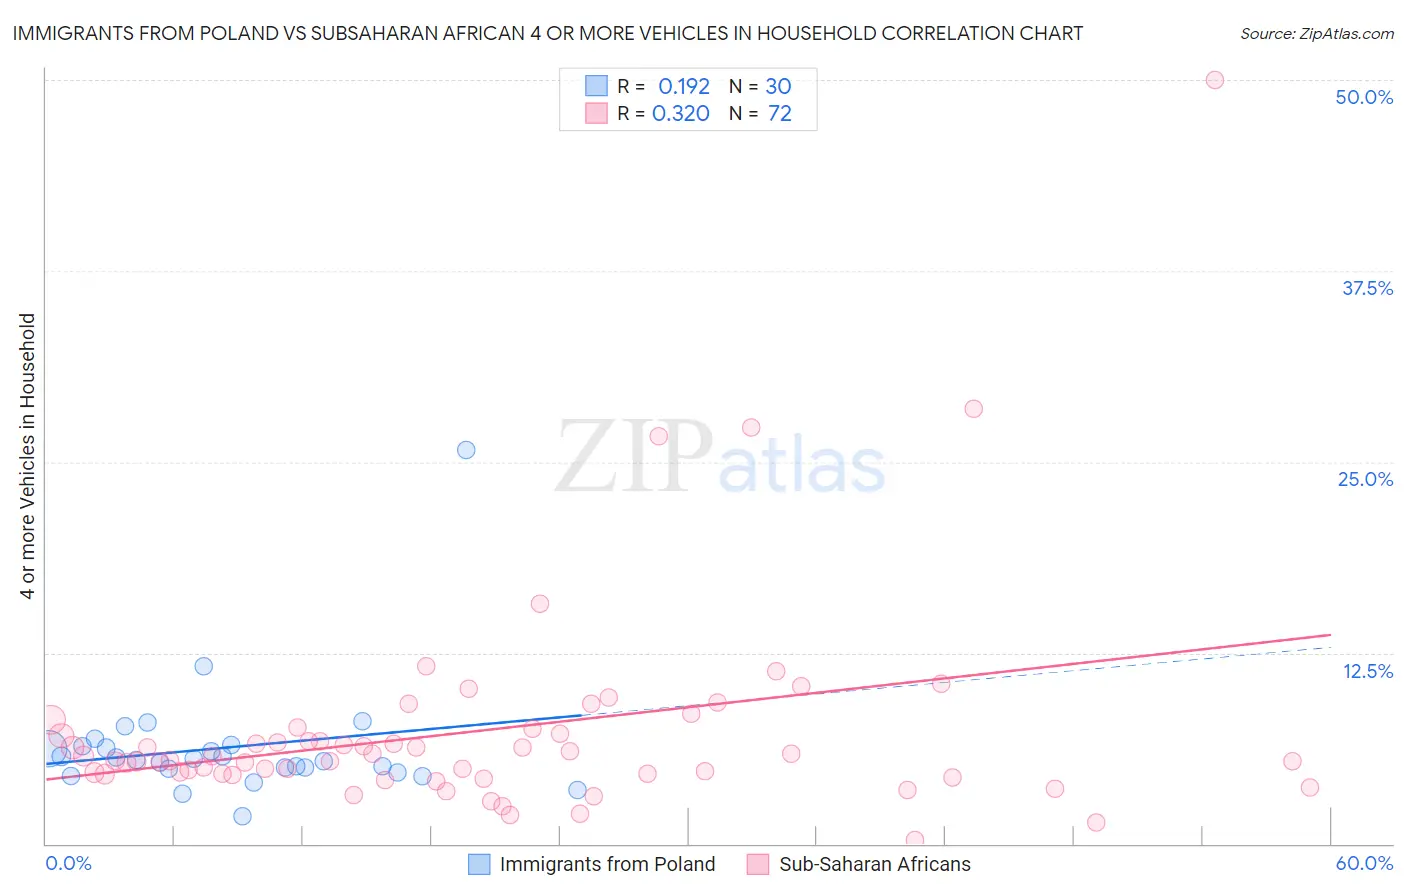 Immigrants from Poland vs Subsaharan African 4 or more Vehicles in Household